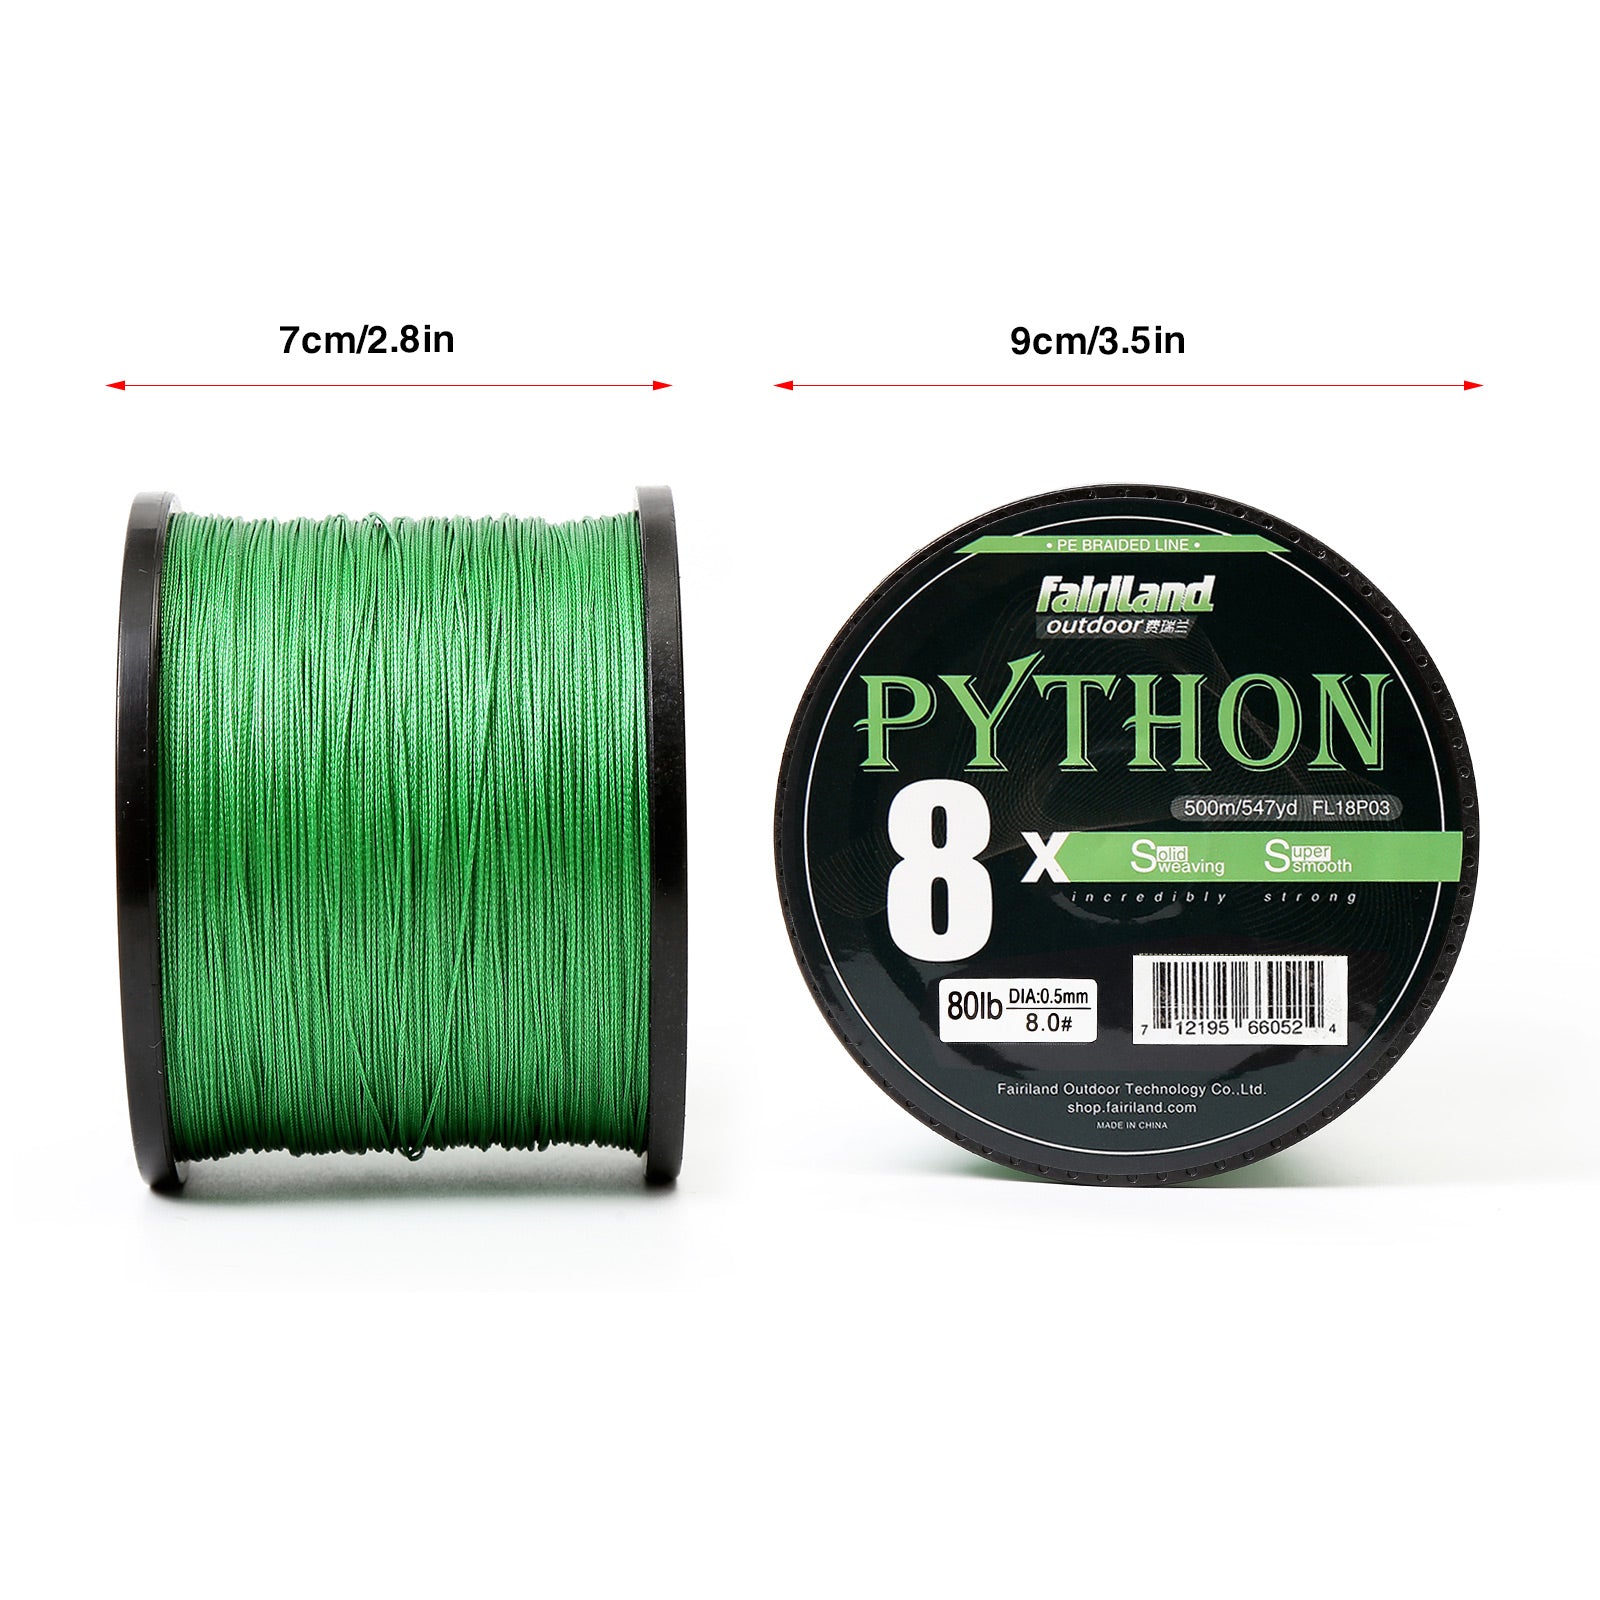 500M Super strong Pe braided fishing line 8 Strands 0.1mm-1.0mm pe